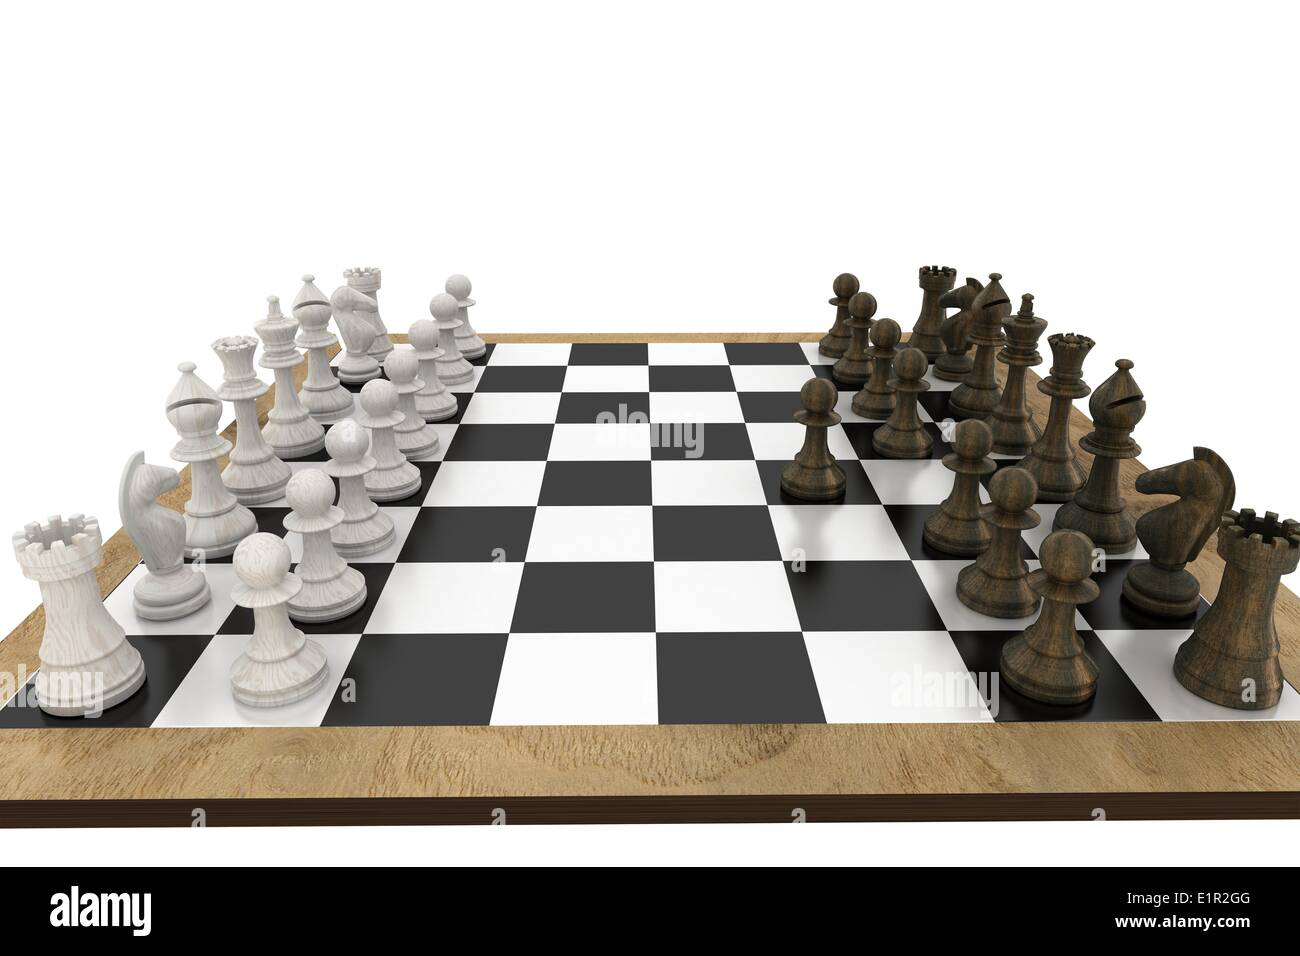 Chess pieces facing off on board Stock Photo